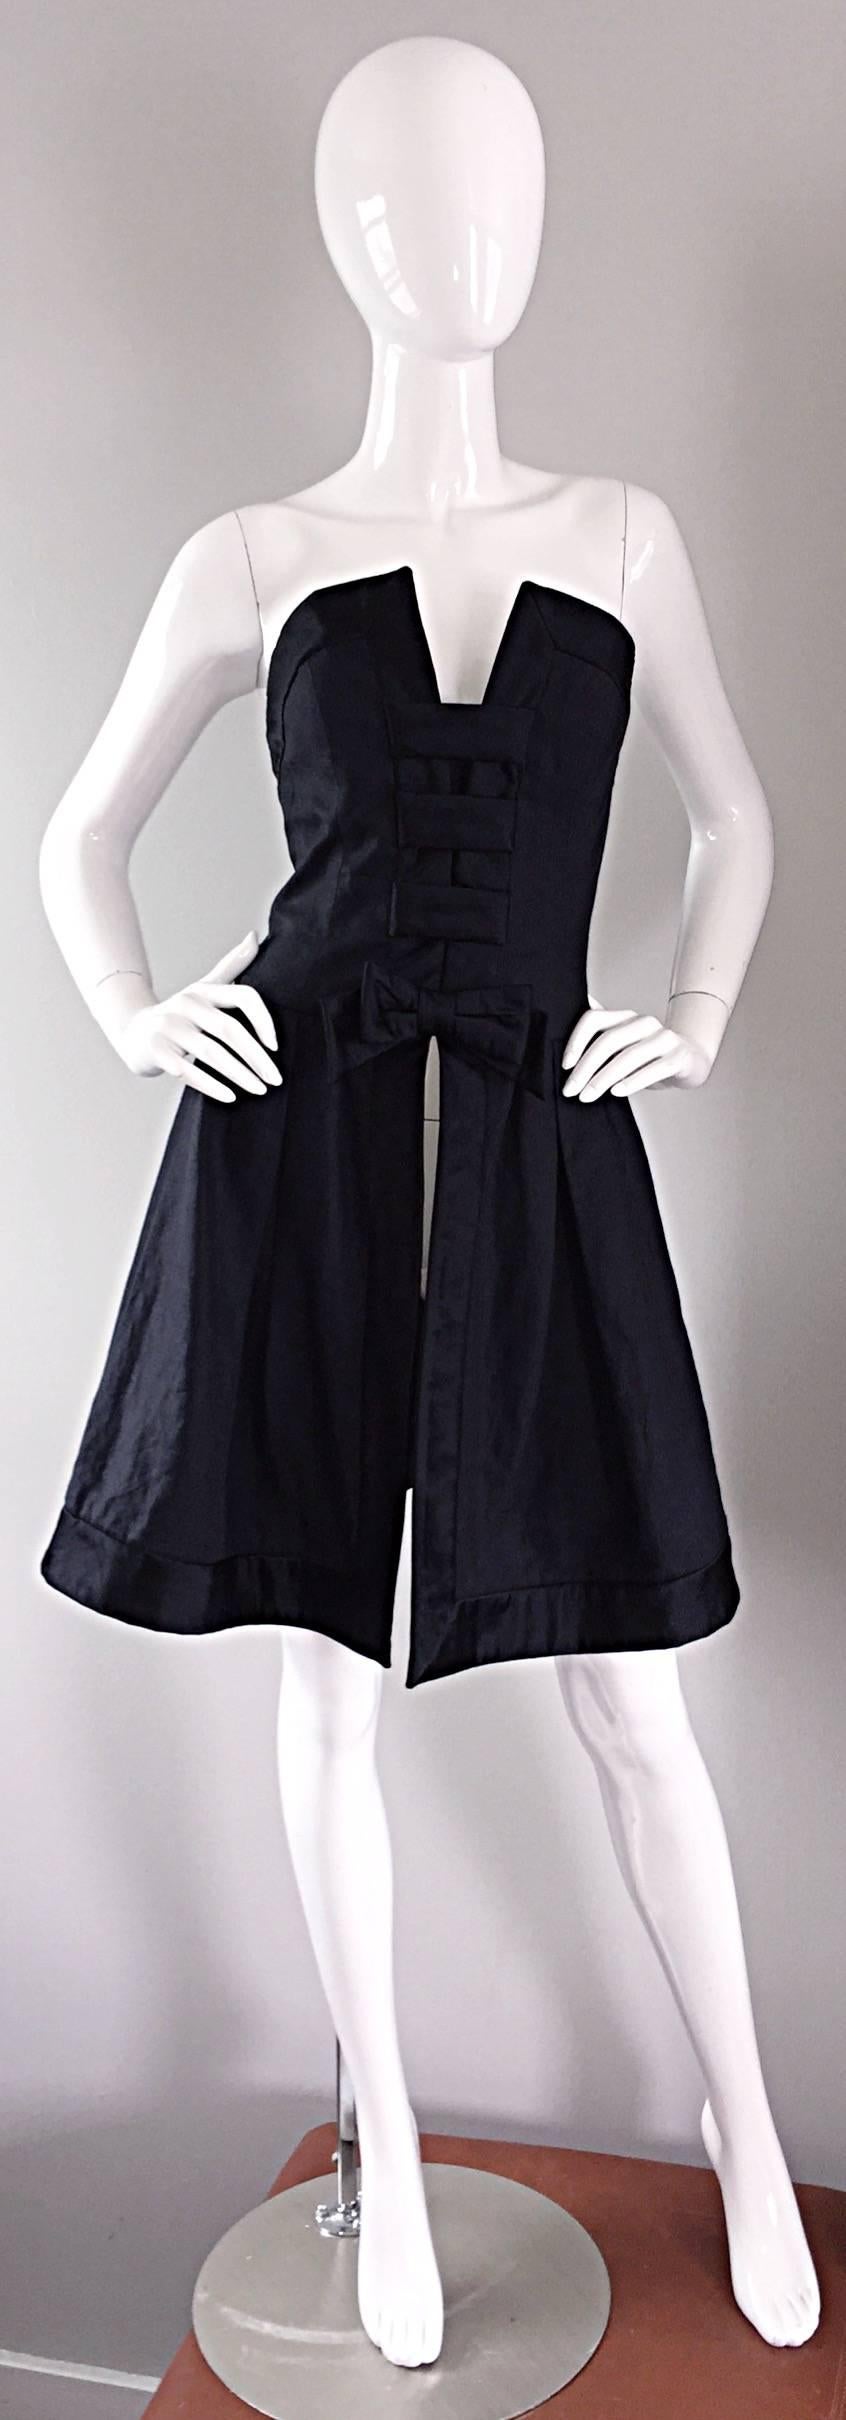 Chic vintage RENA LANGE black silk ' Avant Garde ' bow overdress! Dramatic bust line, with black silk bow adorned at waist. Cut-outs at back. Looks amazing on! Great with over simple black dress, or perfect with slacks. This is truly an AMAZING